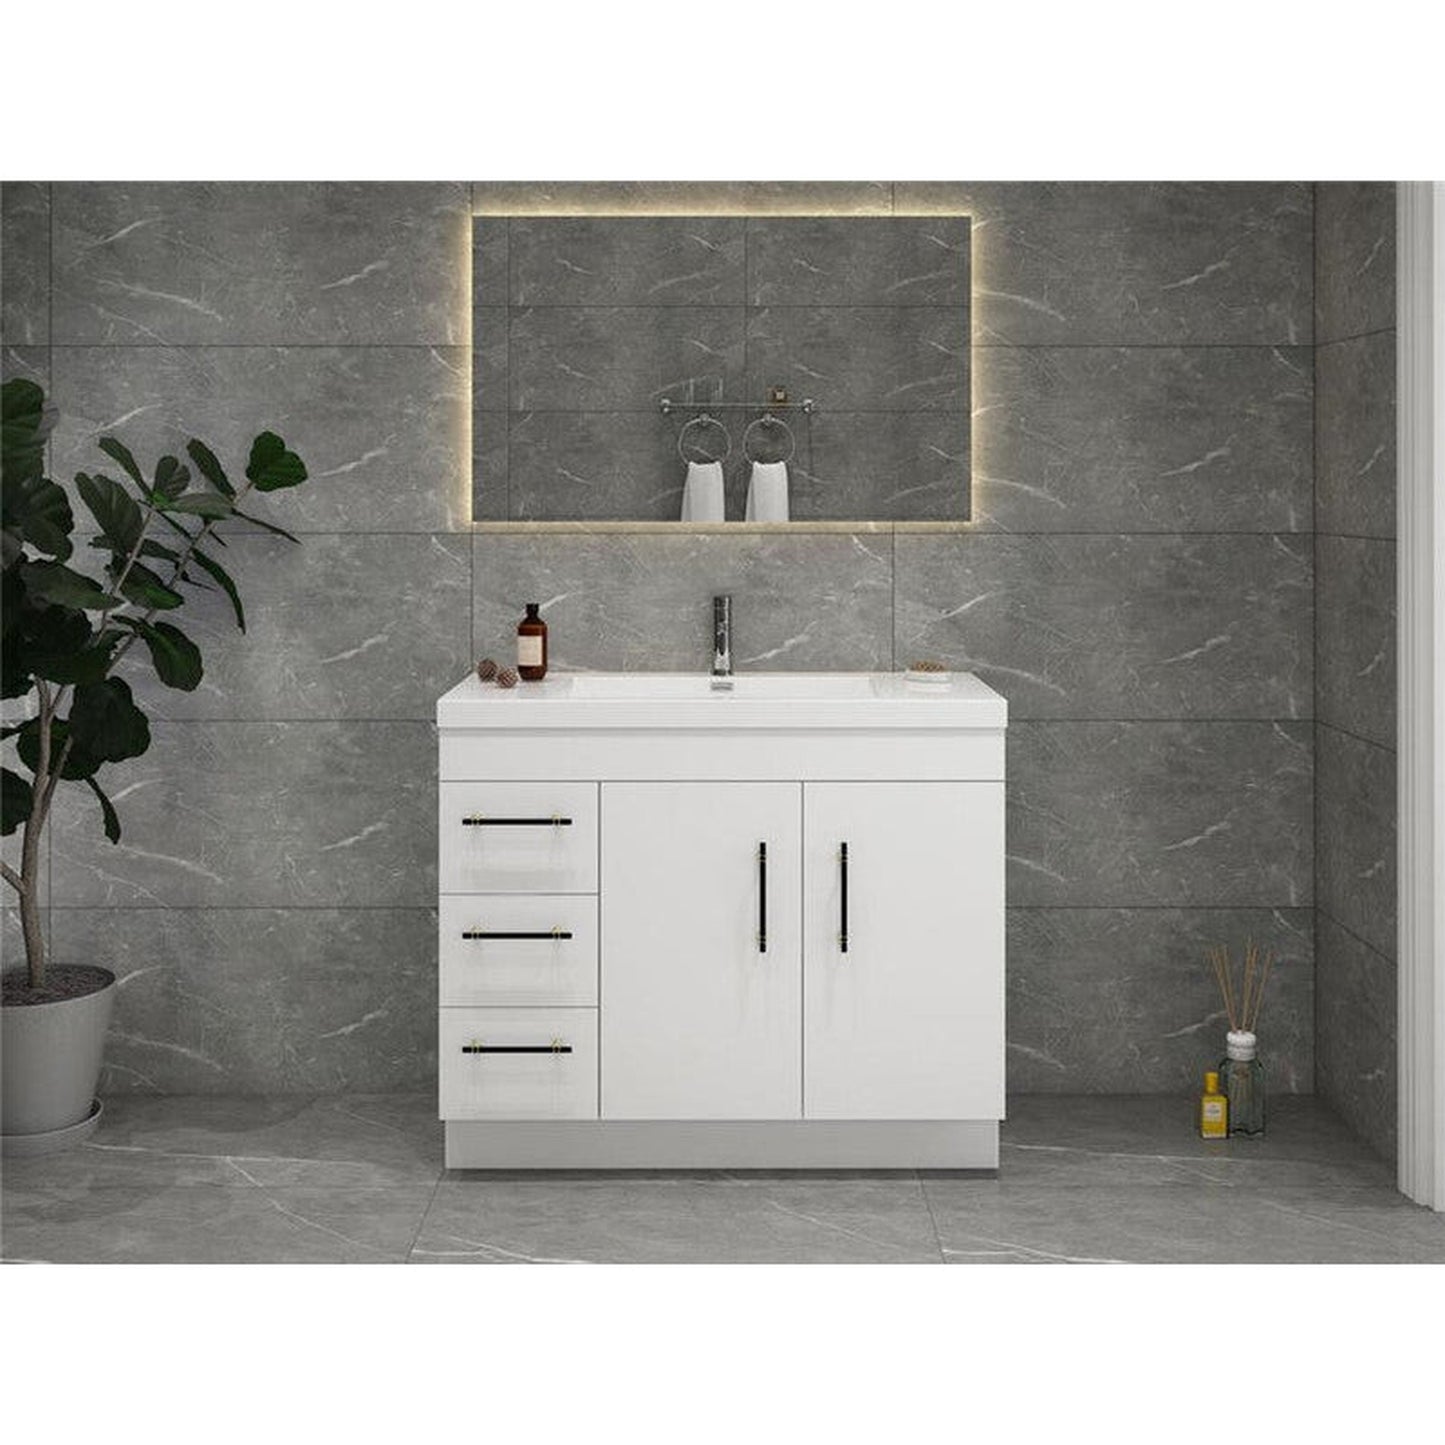 Moreno Bath ELSA 42" High Gloss White Freestanding Vanity With Left Side Drawers and Single Reinforced White Acrylic Sink